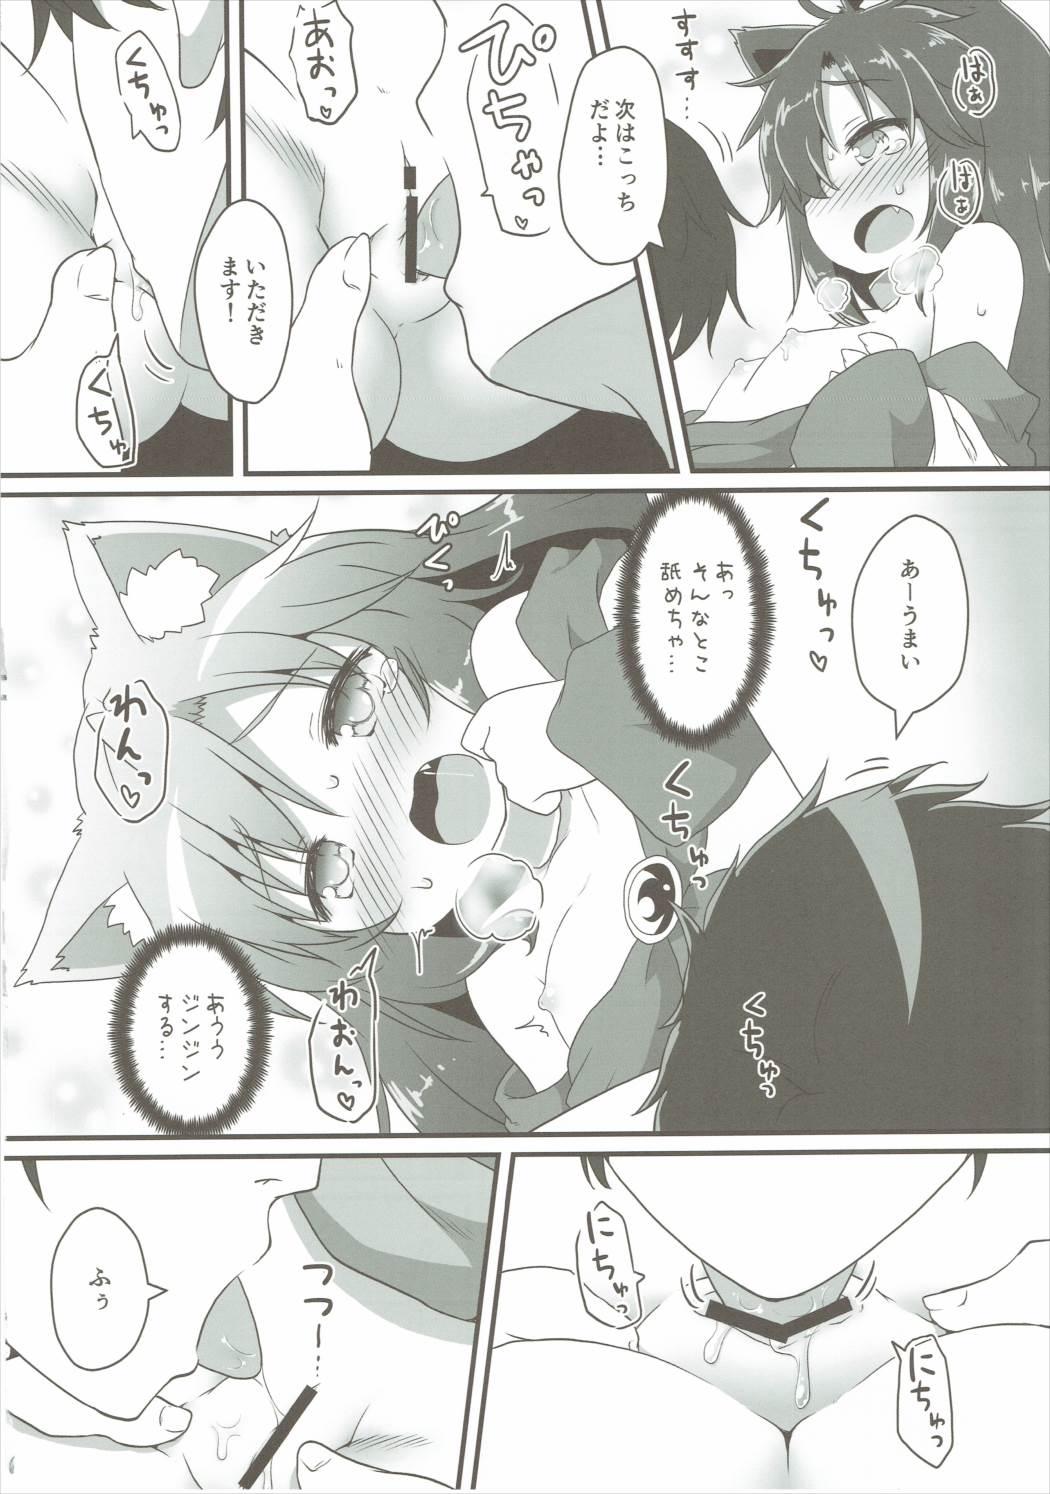 Outdoor Chiisana Loup-garou - Touhou project Exposed - Page 11